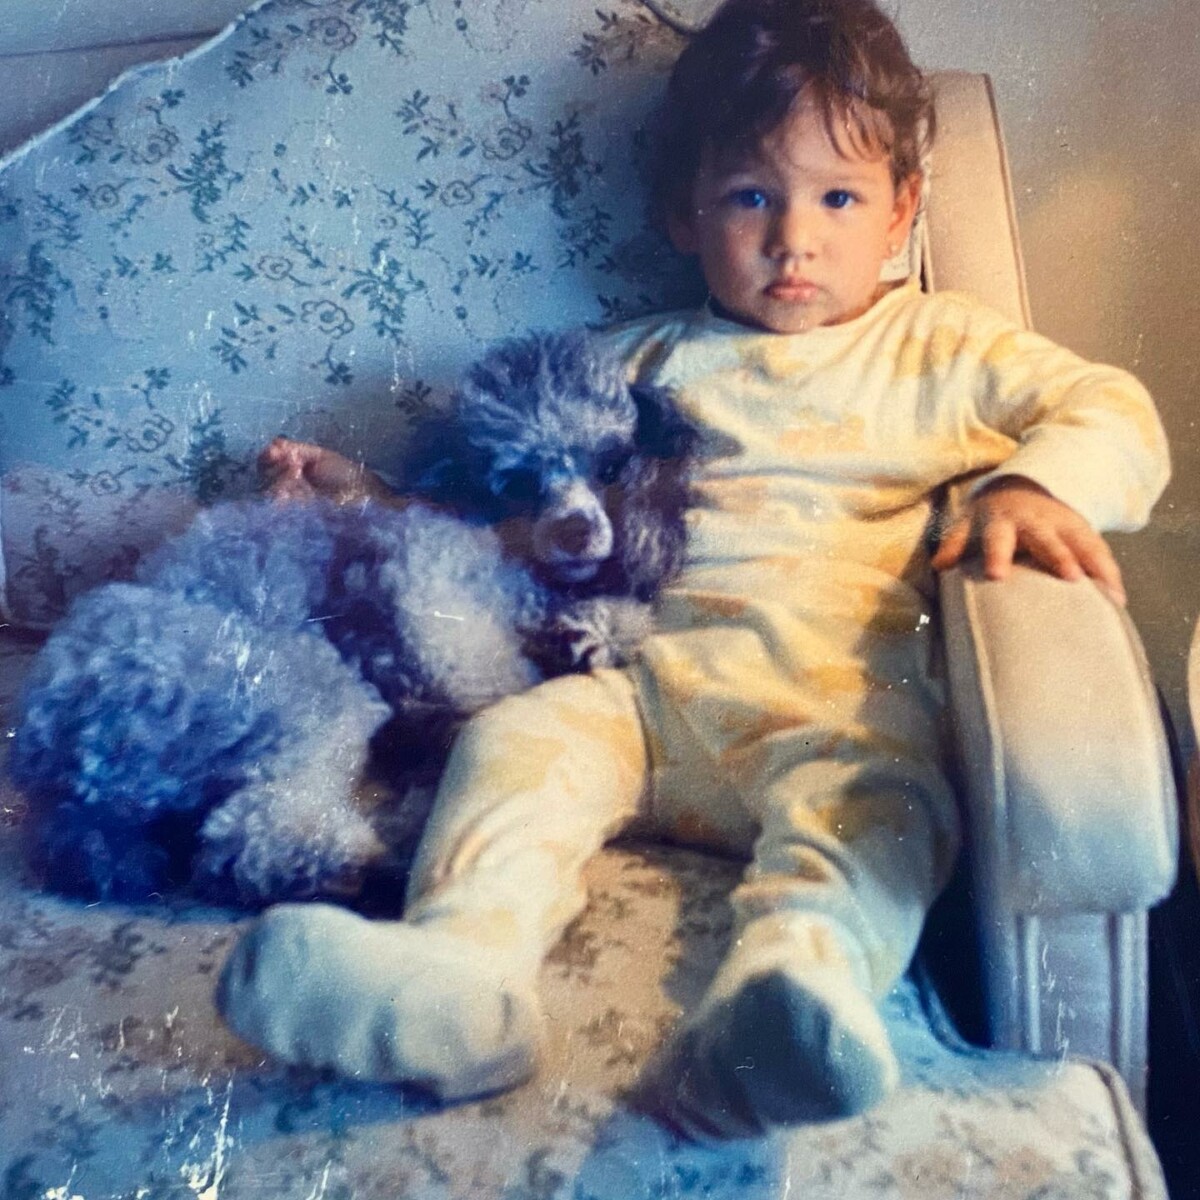 #tbt Baby me and what do I see? Tenderness & ingenuity and what comes to me is - be kind to yourself, listen to your voice, love your inner child, play 🧡 #throwbackthursday #throwback #babygirl #love #life #kindness